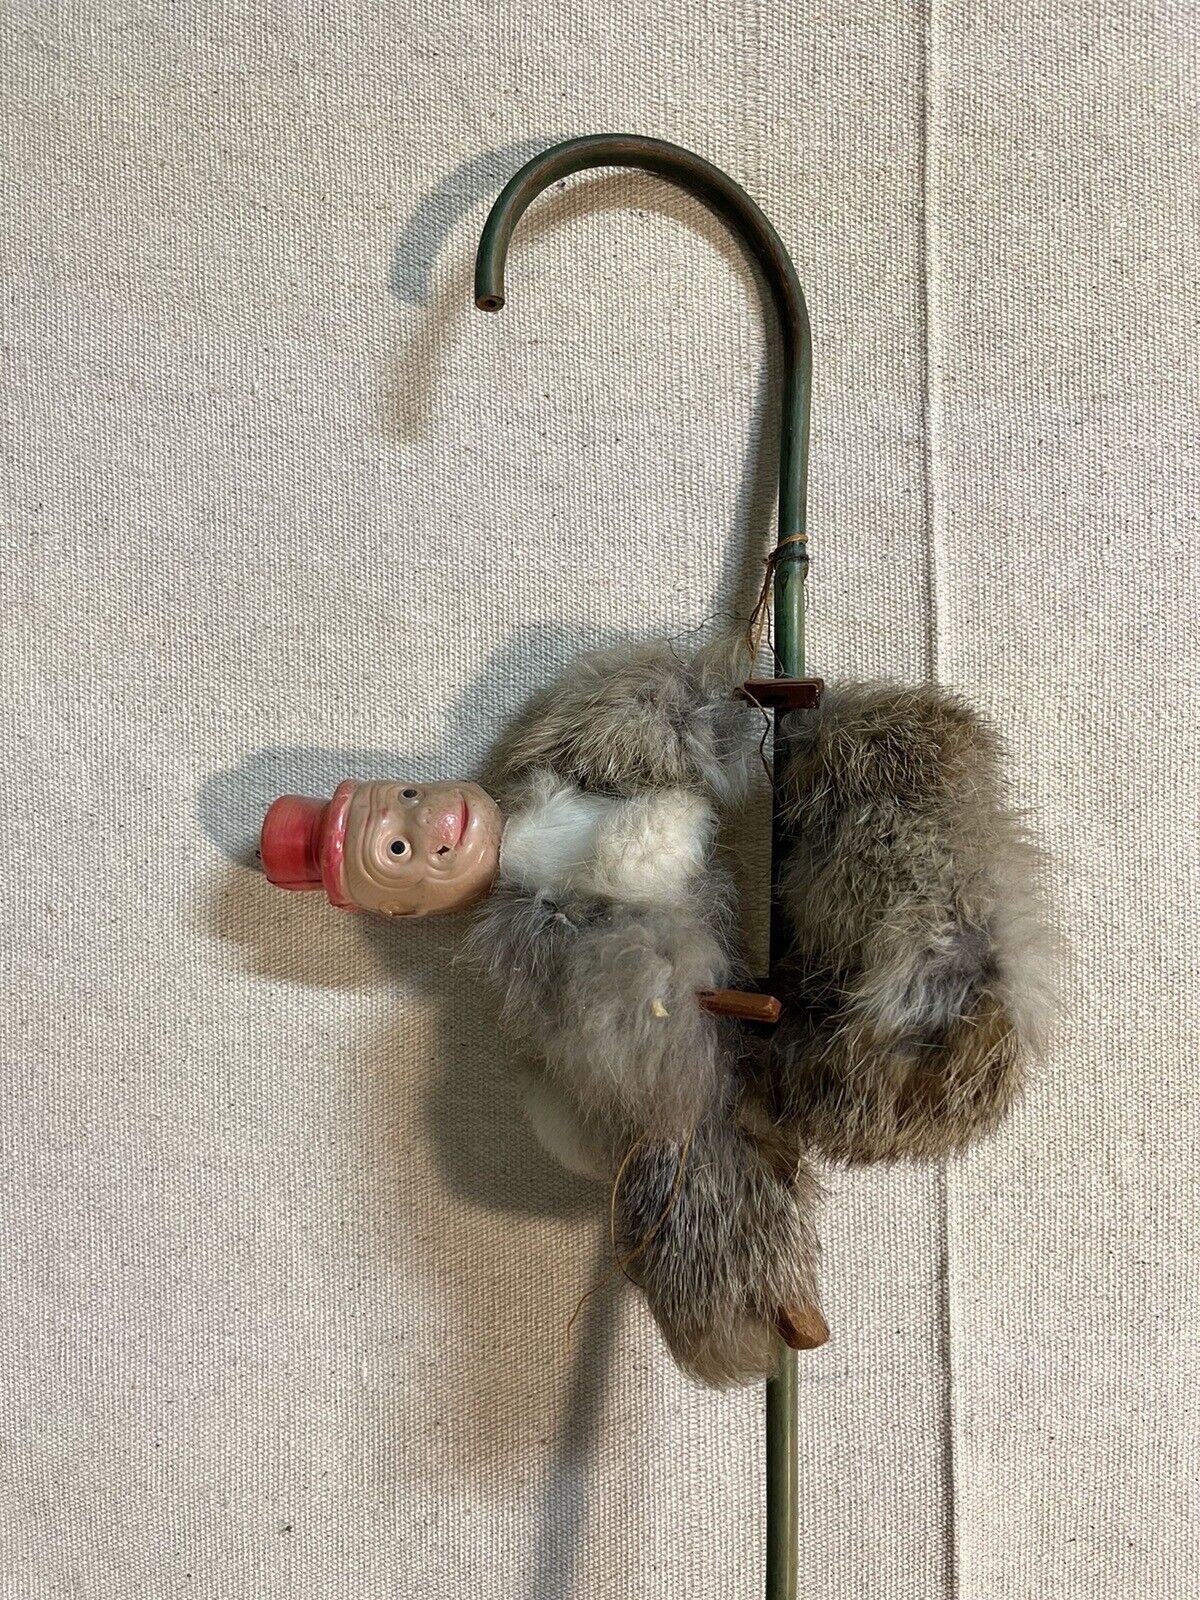 Carnival Prize Monkey on Cane State Fair Giveaway 1930 Original Celluloid Japan